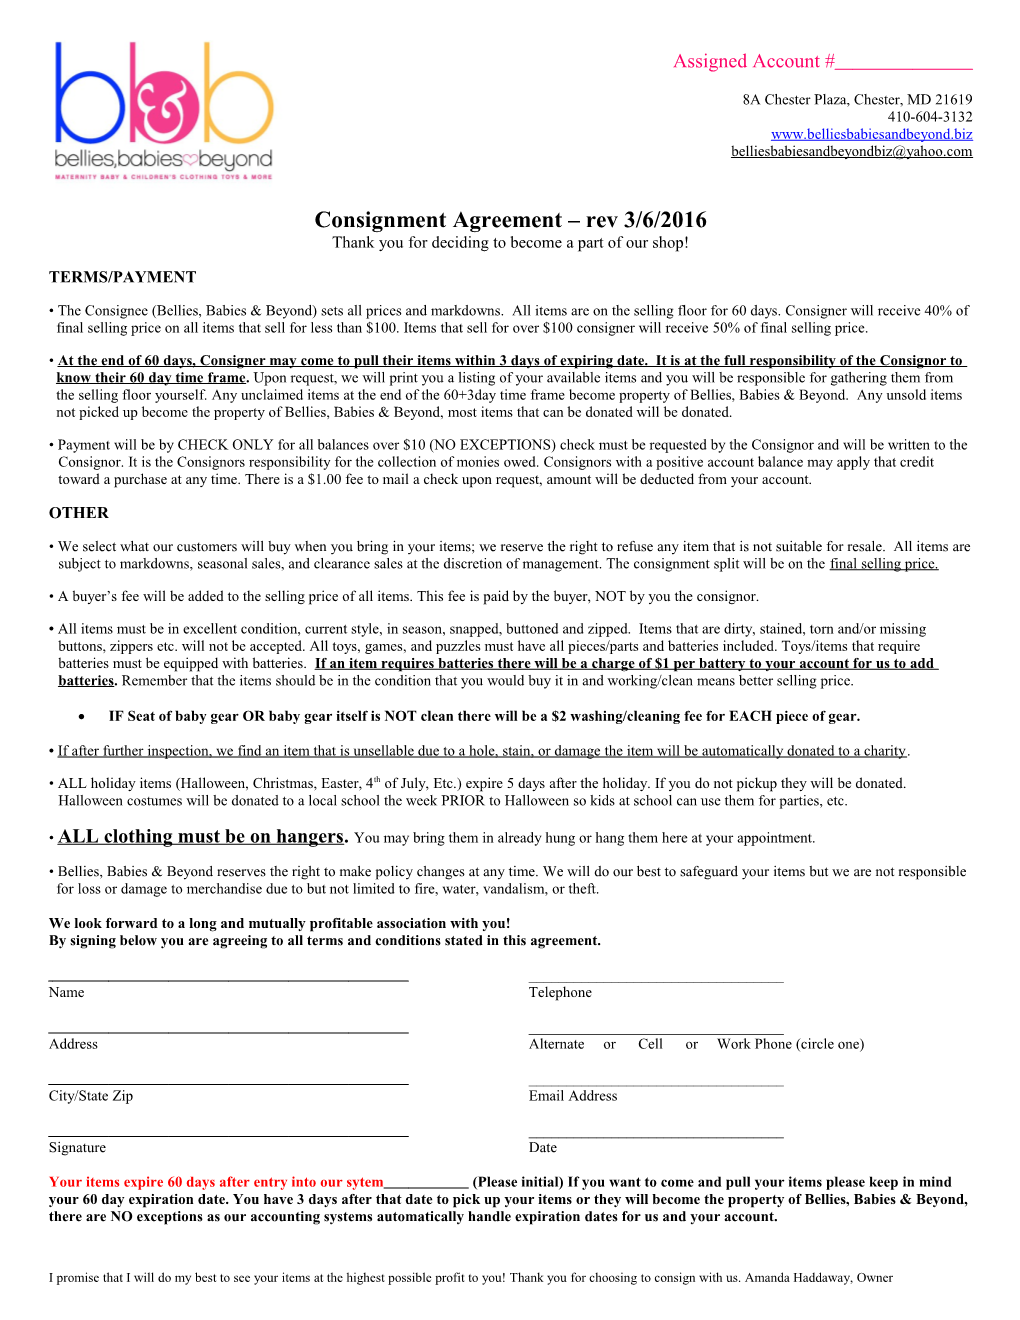 Consignment Agreement Rev 3/6/2016